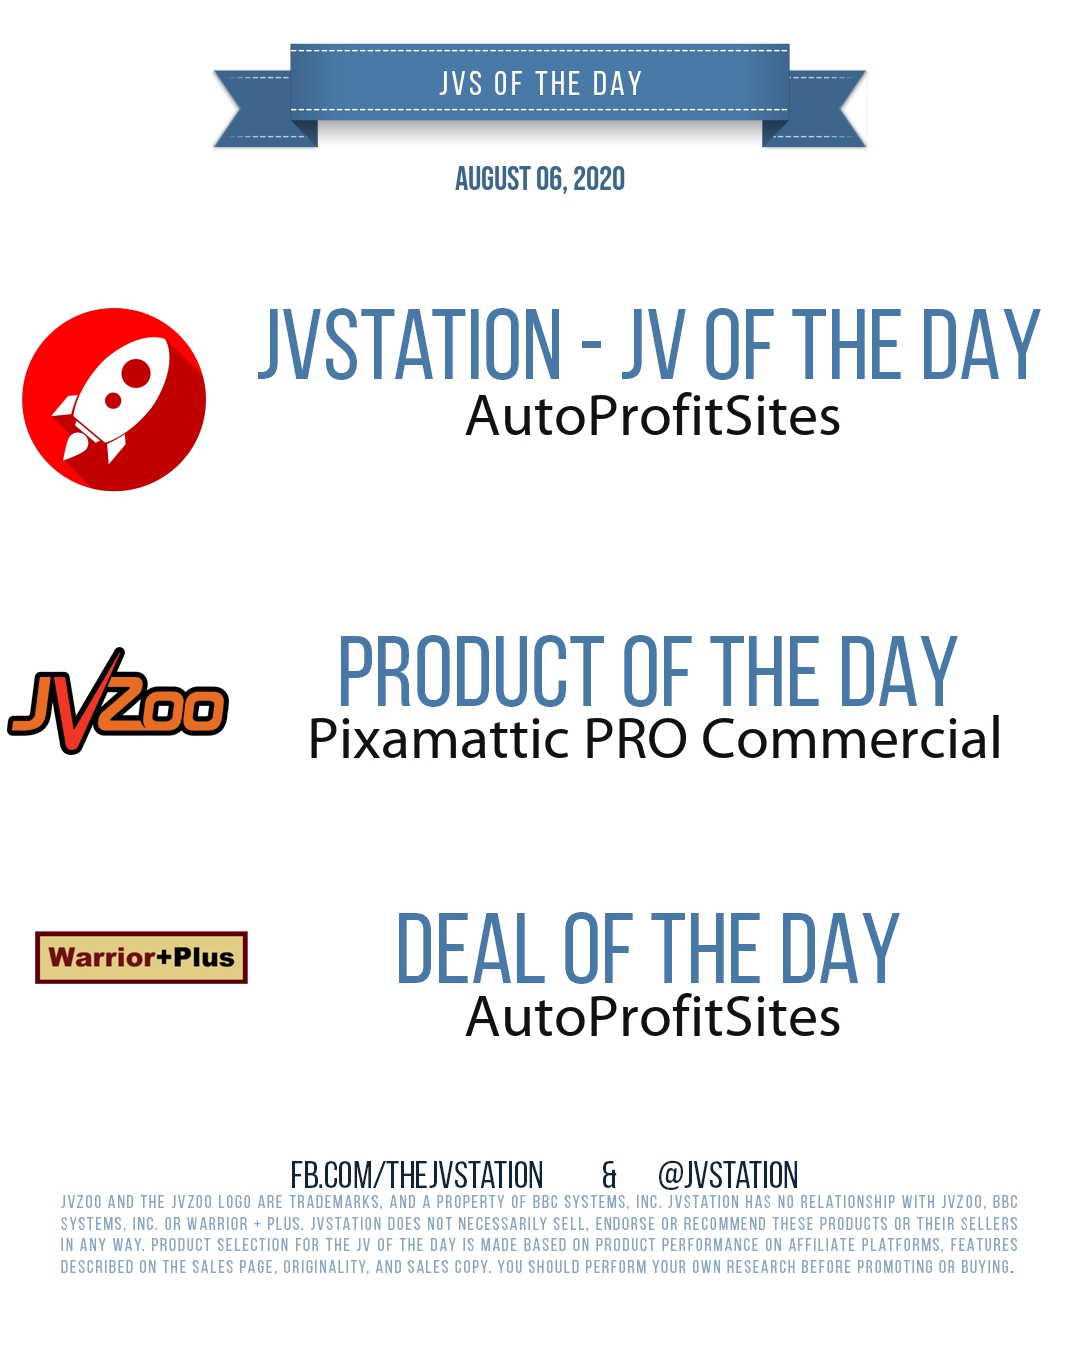 JVs of the day - August 06, 2020